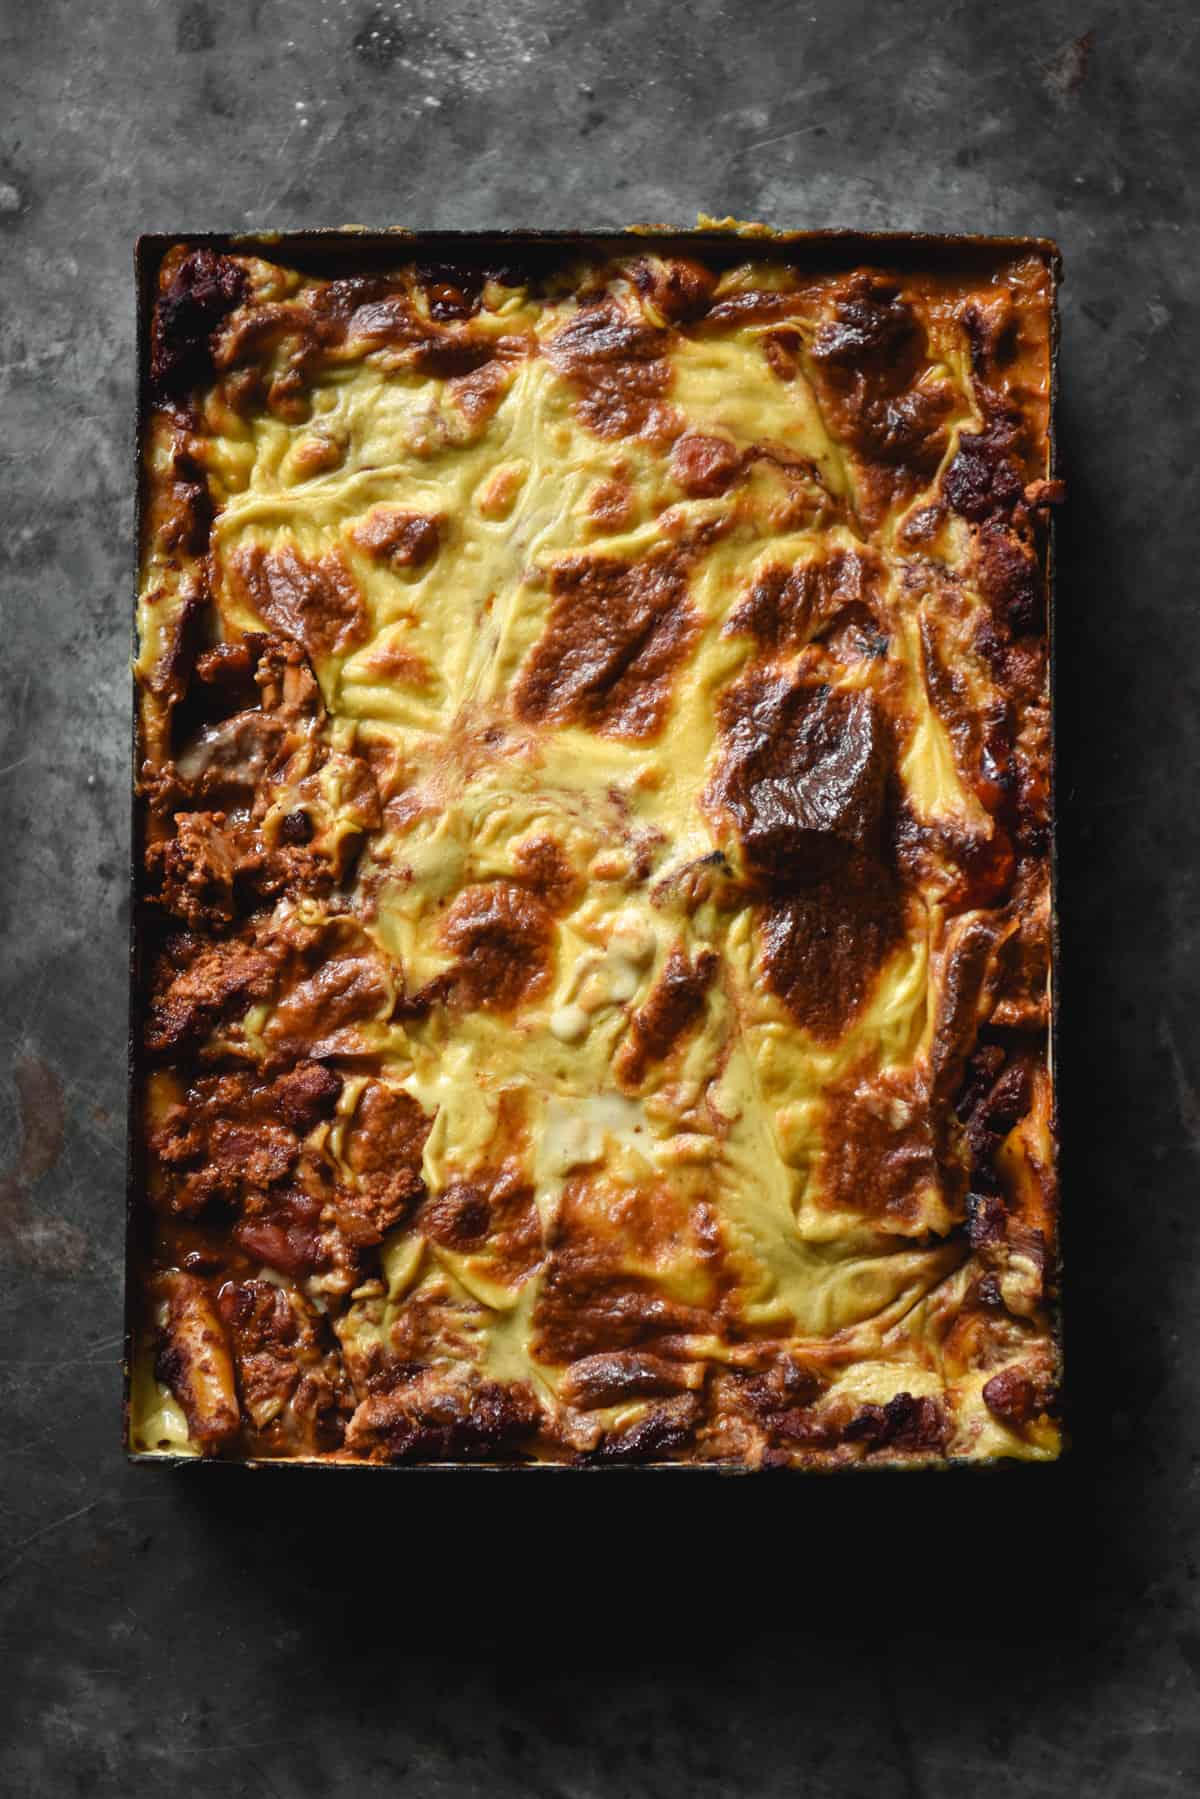 An aerial view of a gluten free, FODMAP friendly and vegan 'mince' lasagne on a dark steel backdrop